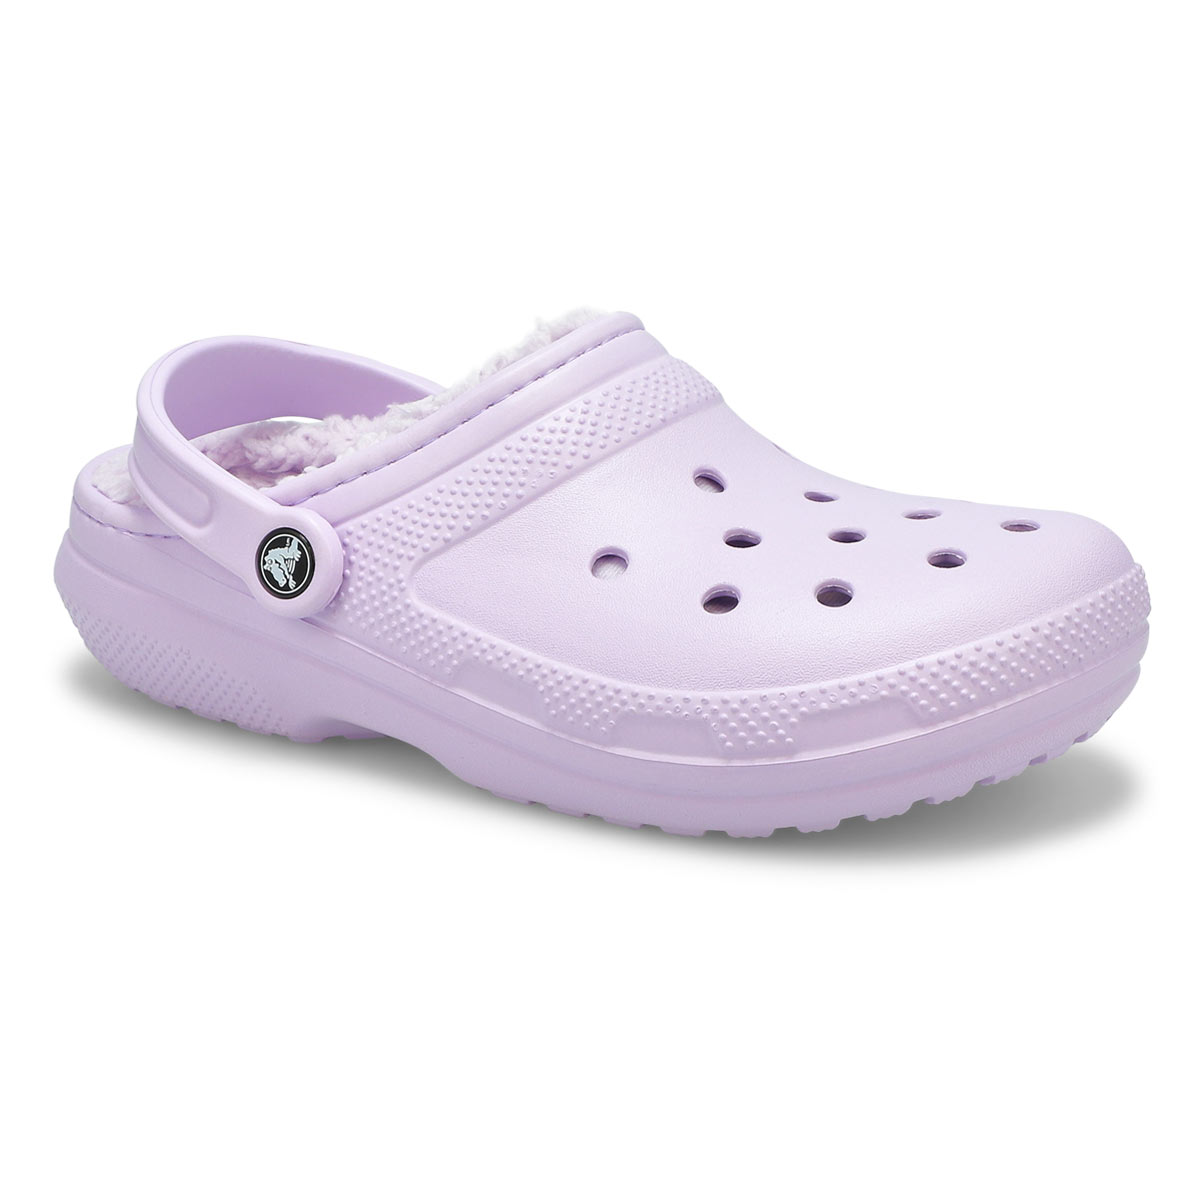 Crocs Women's Shoes Fuzz-lined Rubber Closed Toe Slip on White 